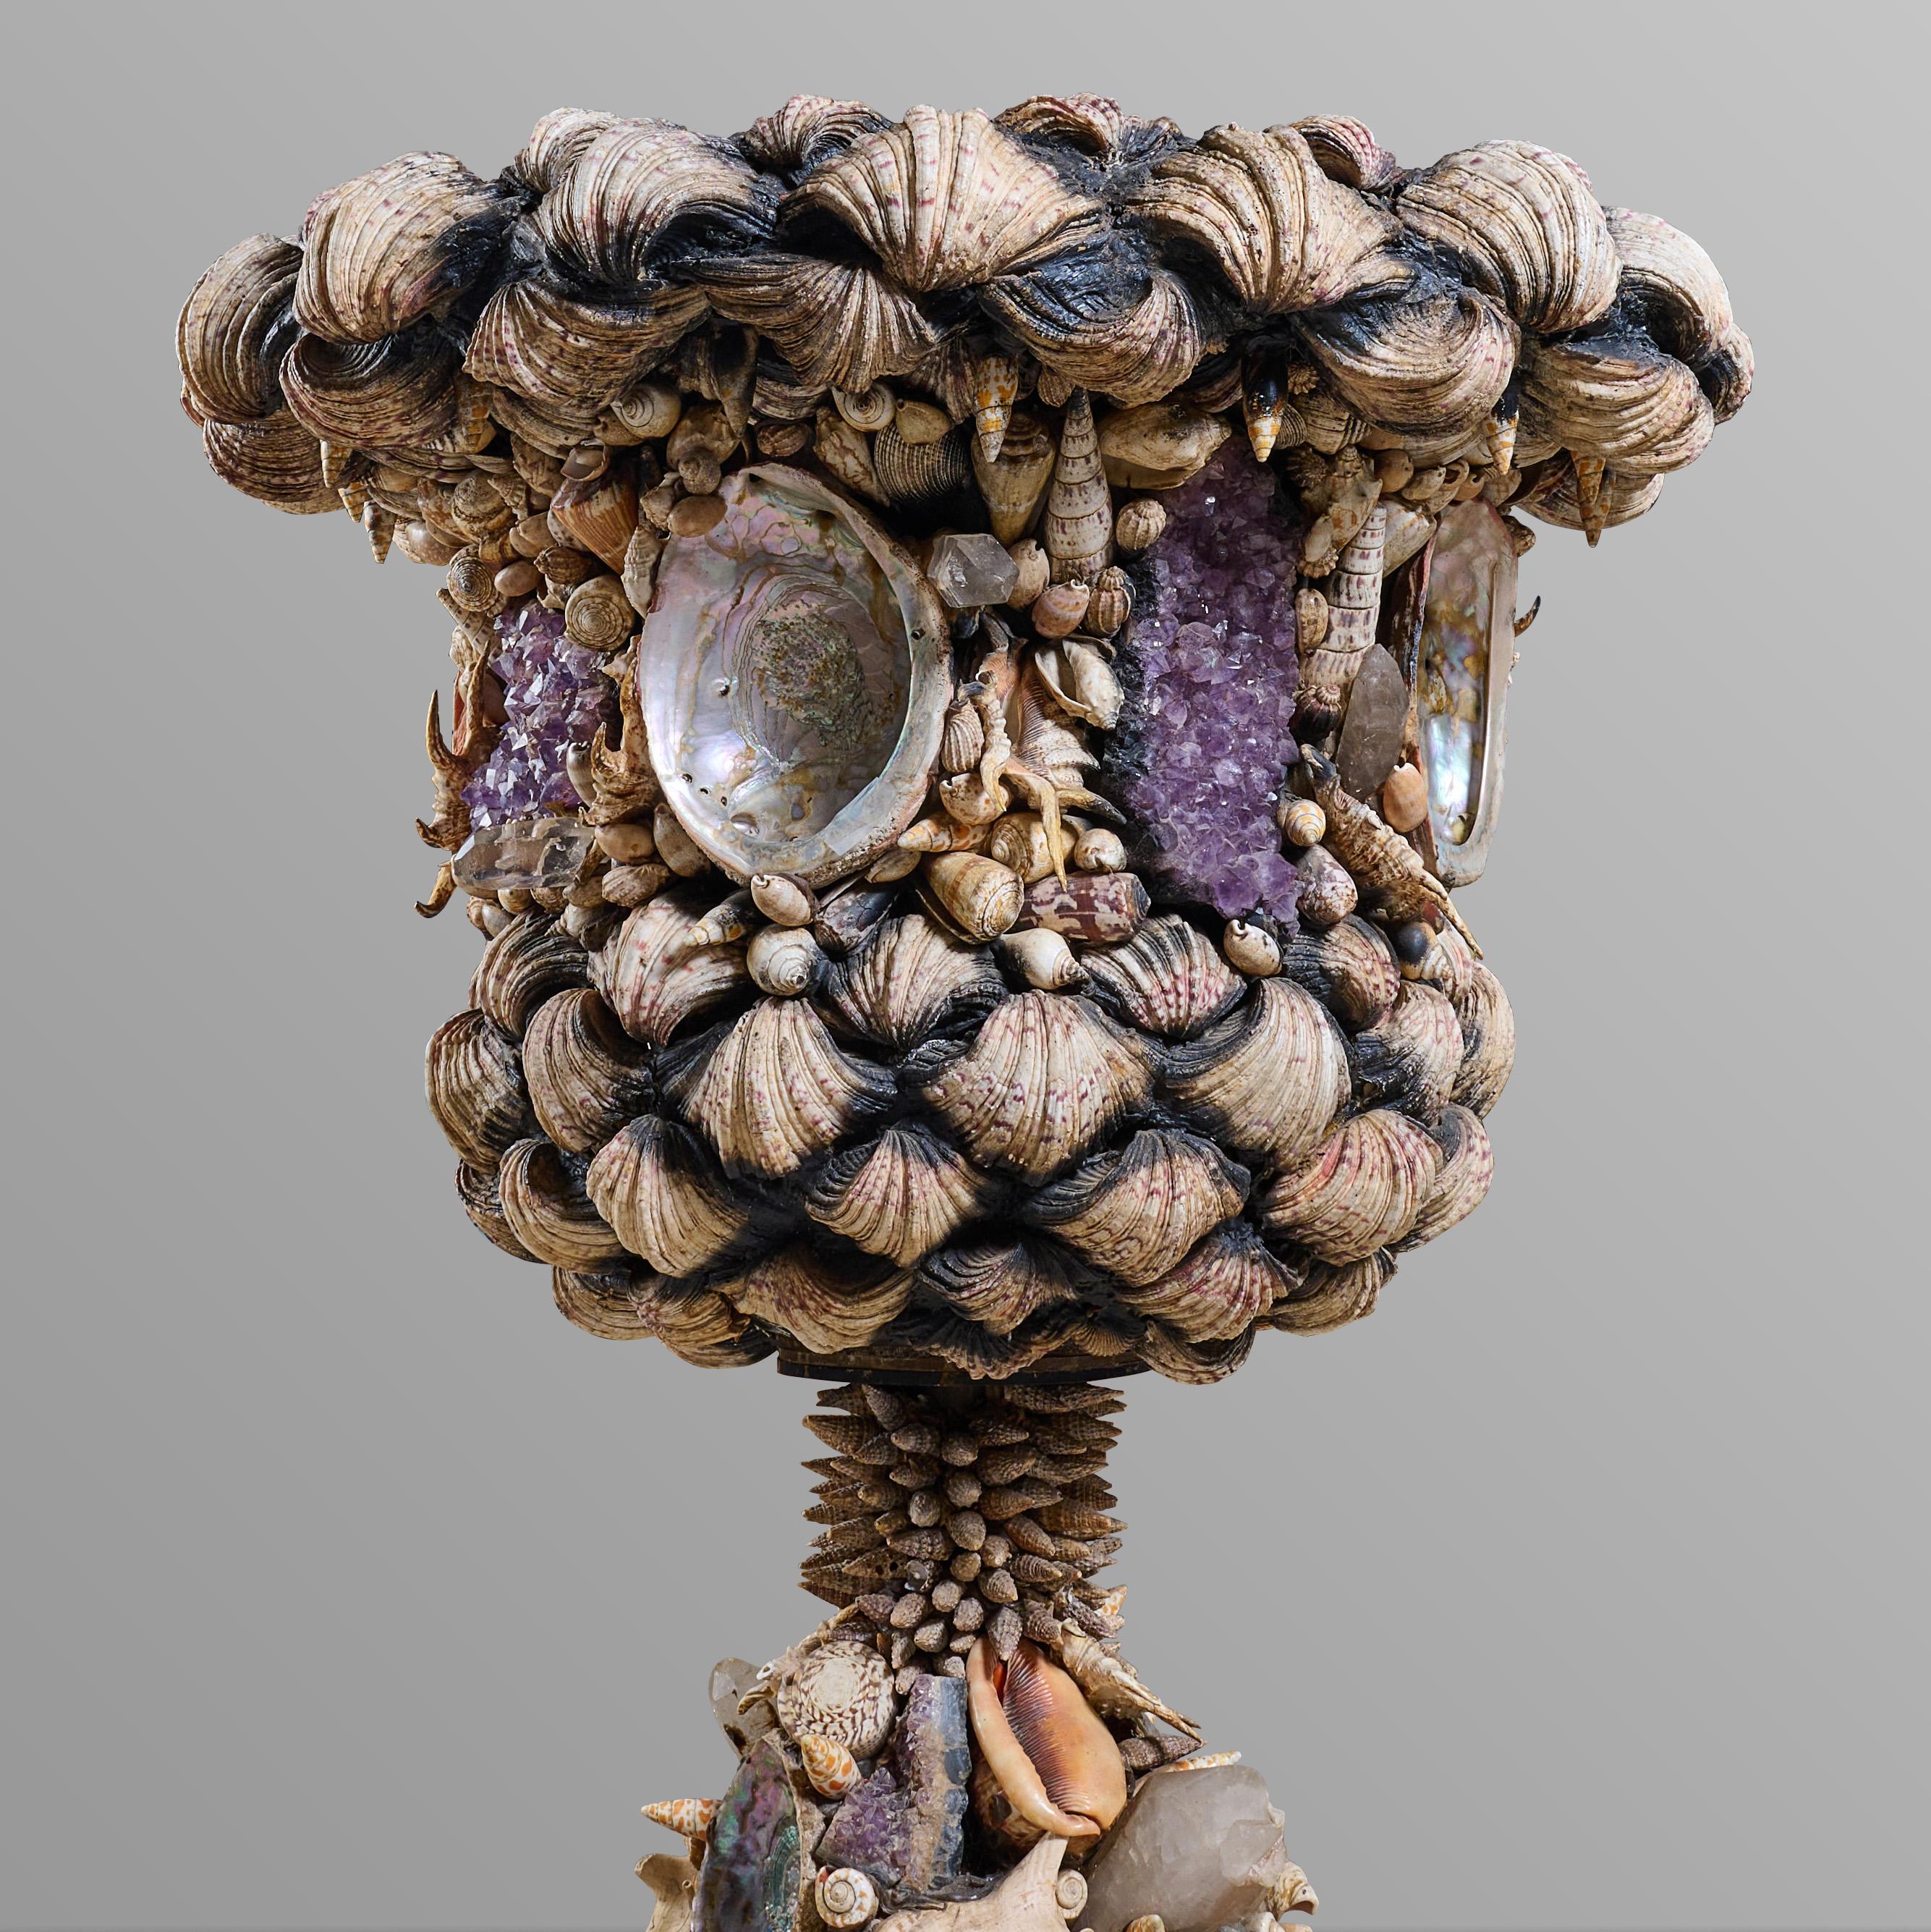 American Decorative Urn with Shells and Crystals